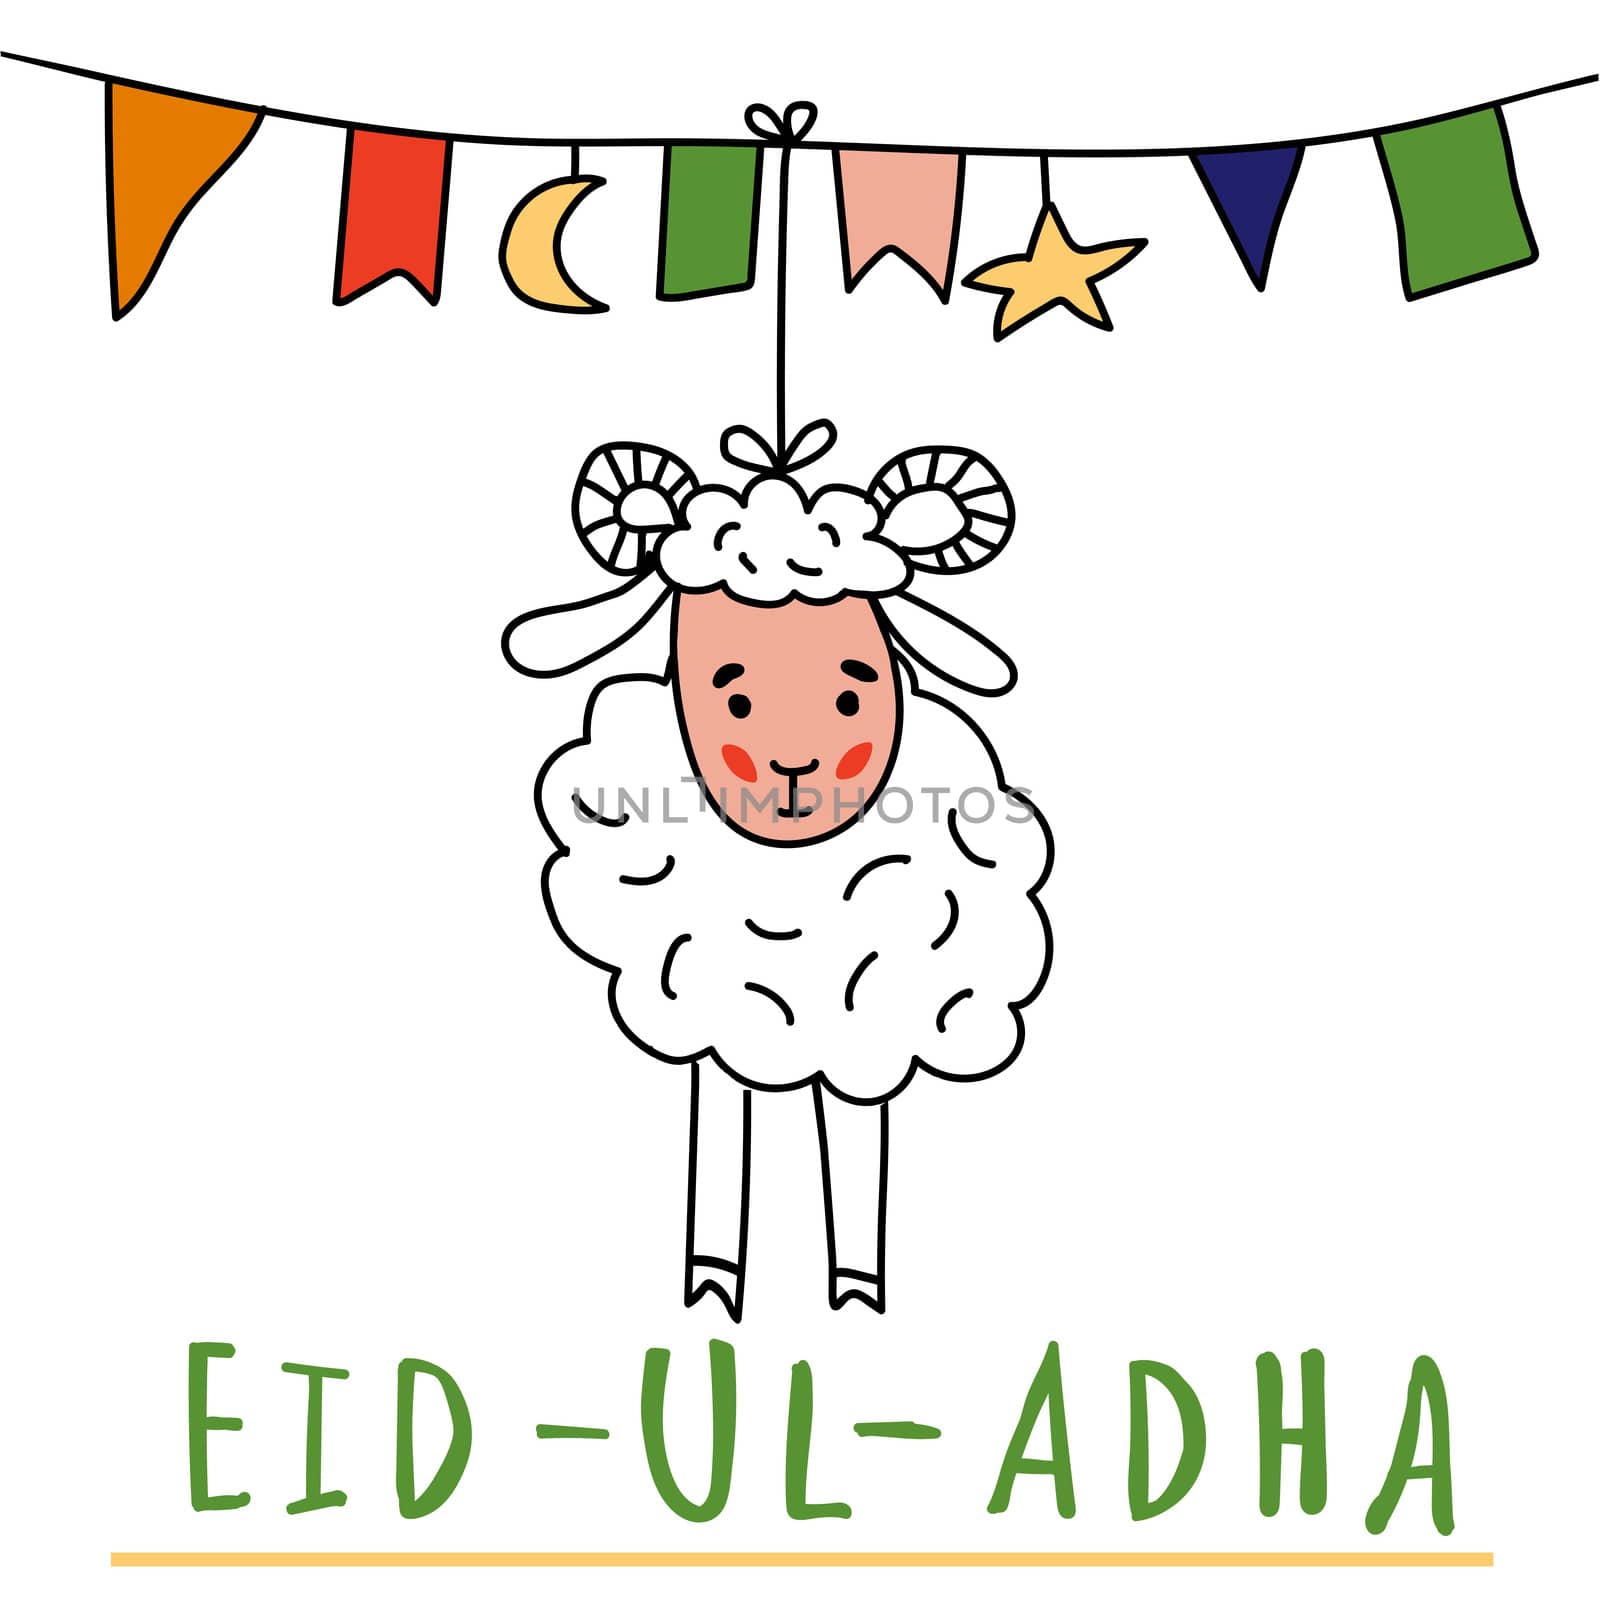 Eid ul adha greeting card with sheep, moon, star and flags, muslim community festival of sacrifice. illustration in style doodle. Islamic holiday. by zaryov